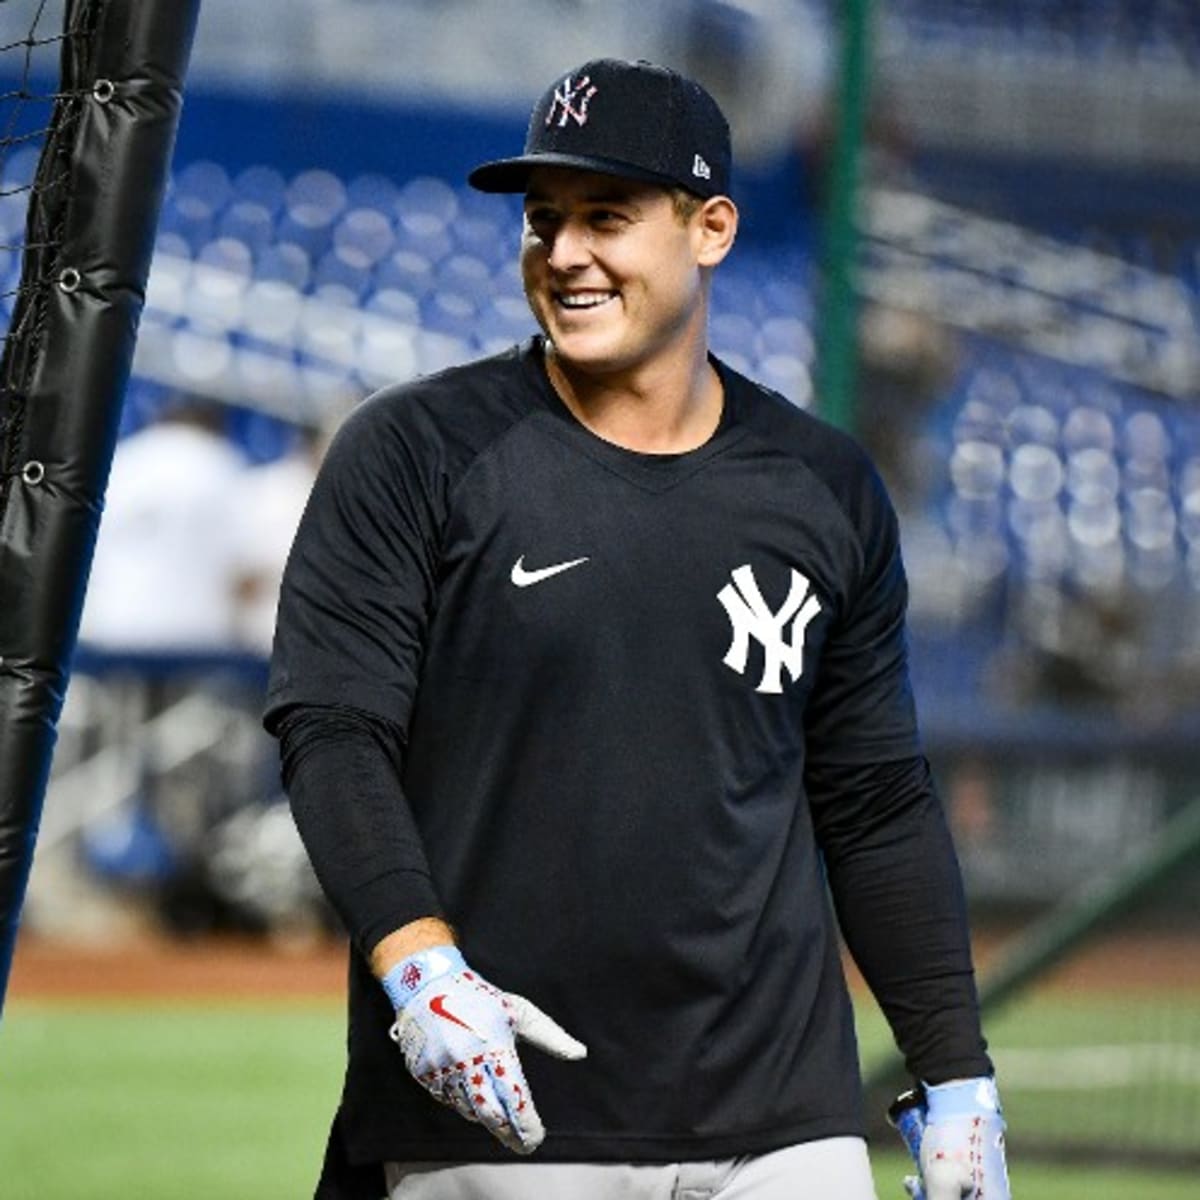 Anthony Rizzo homers in Yankees debut